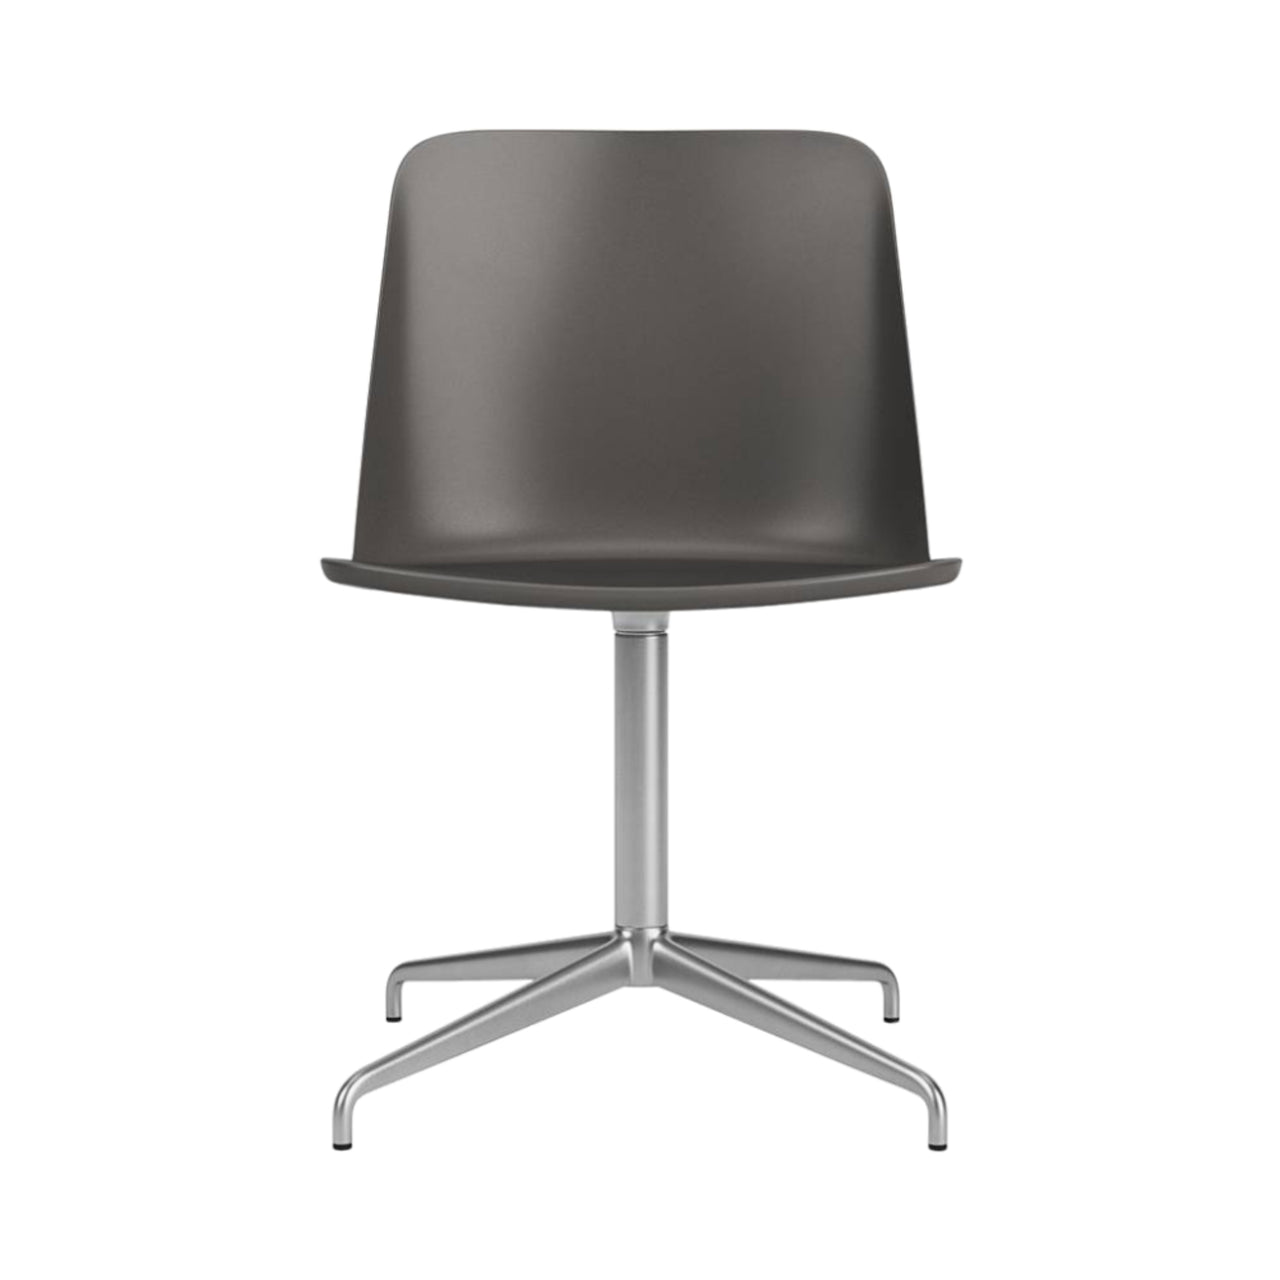 Rely Chair HW11: Stone Grey + Polished Aluminum